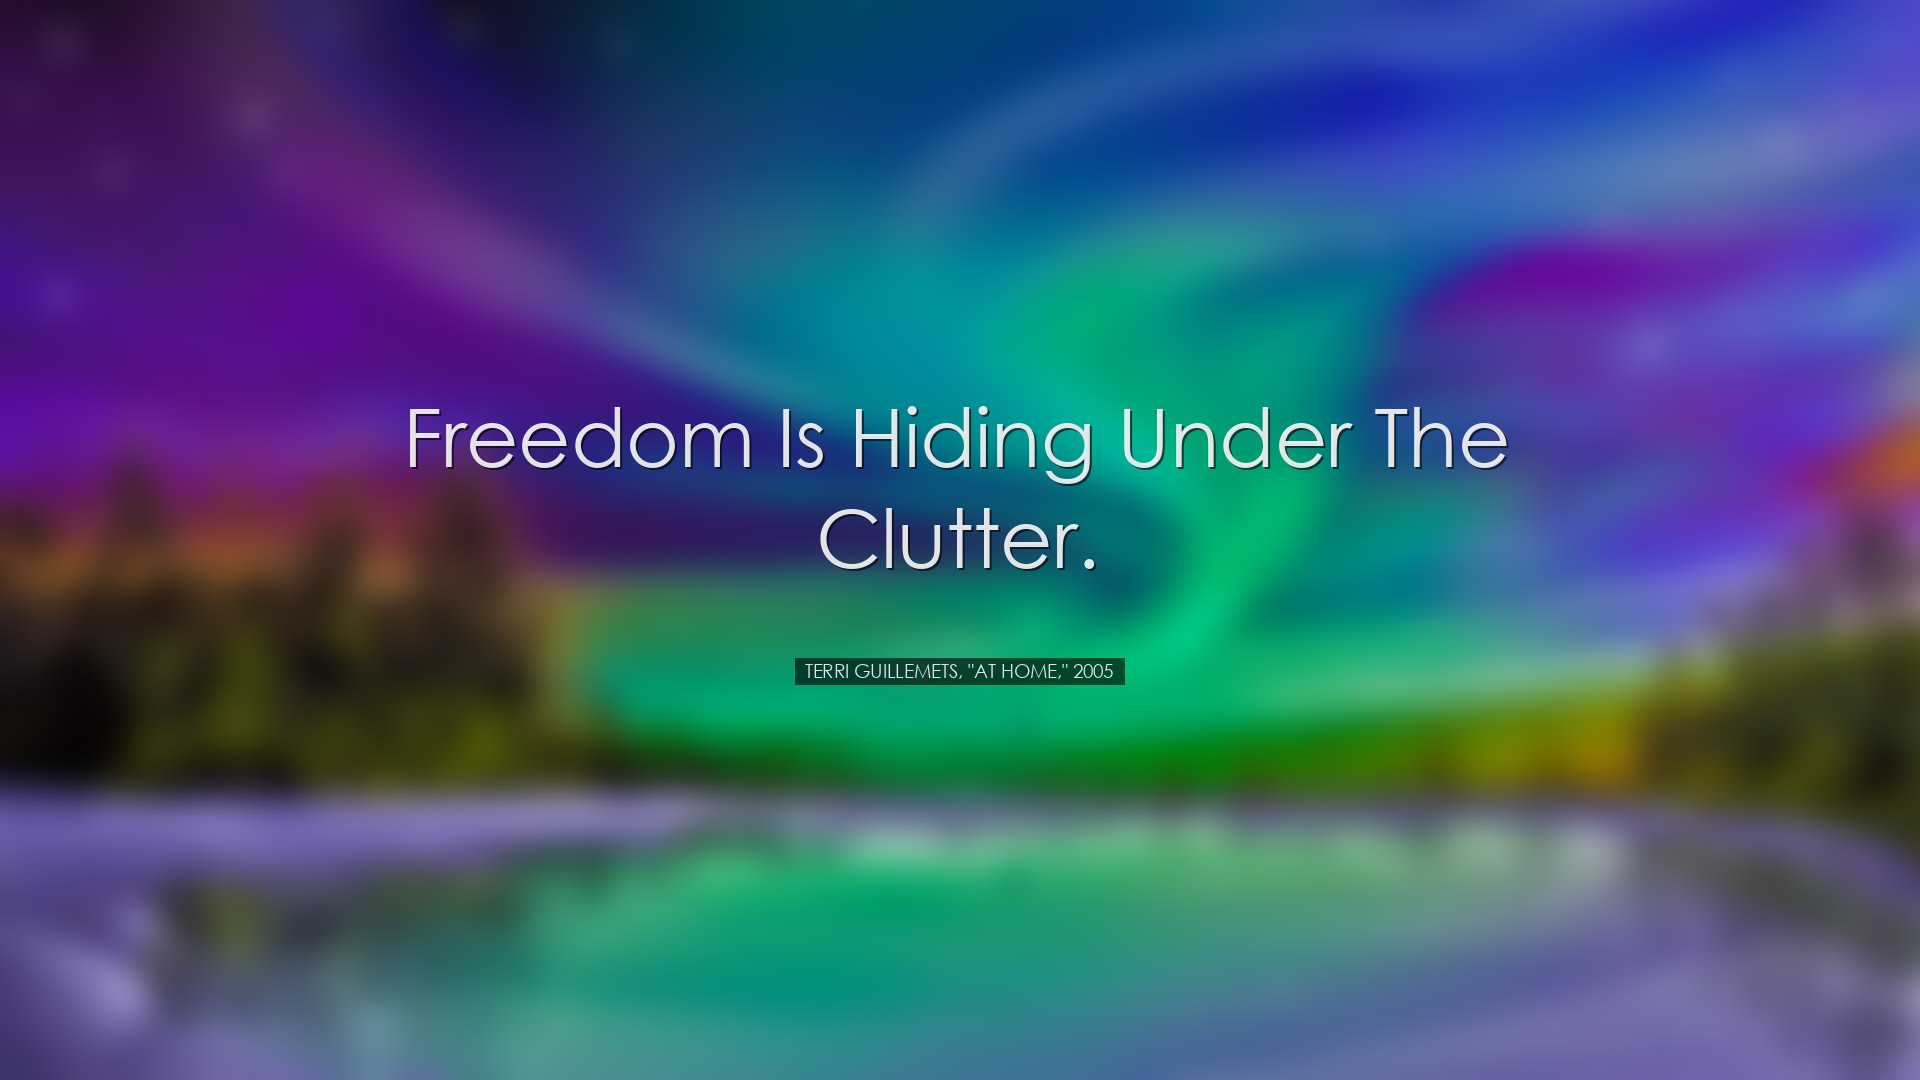 Freedom is hiding under the clutter. - Terri Guillemets, 